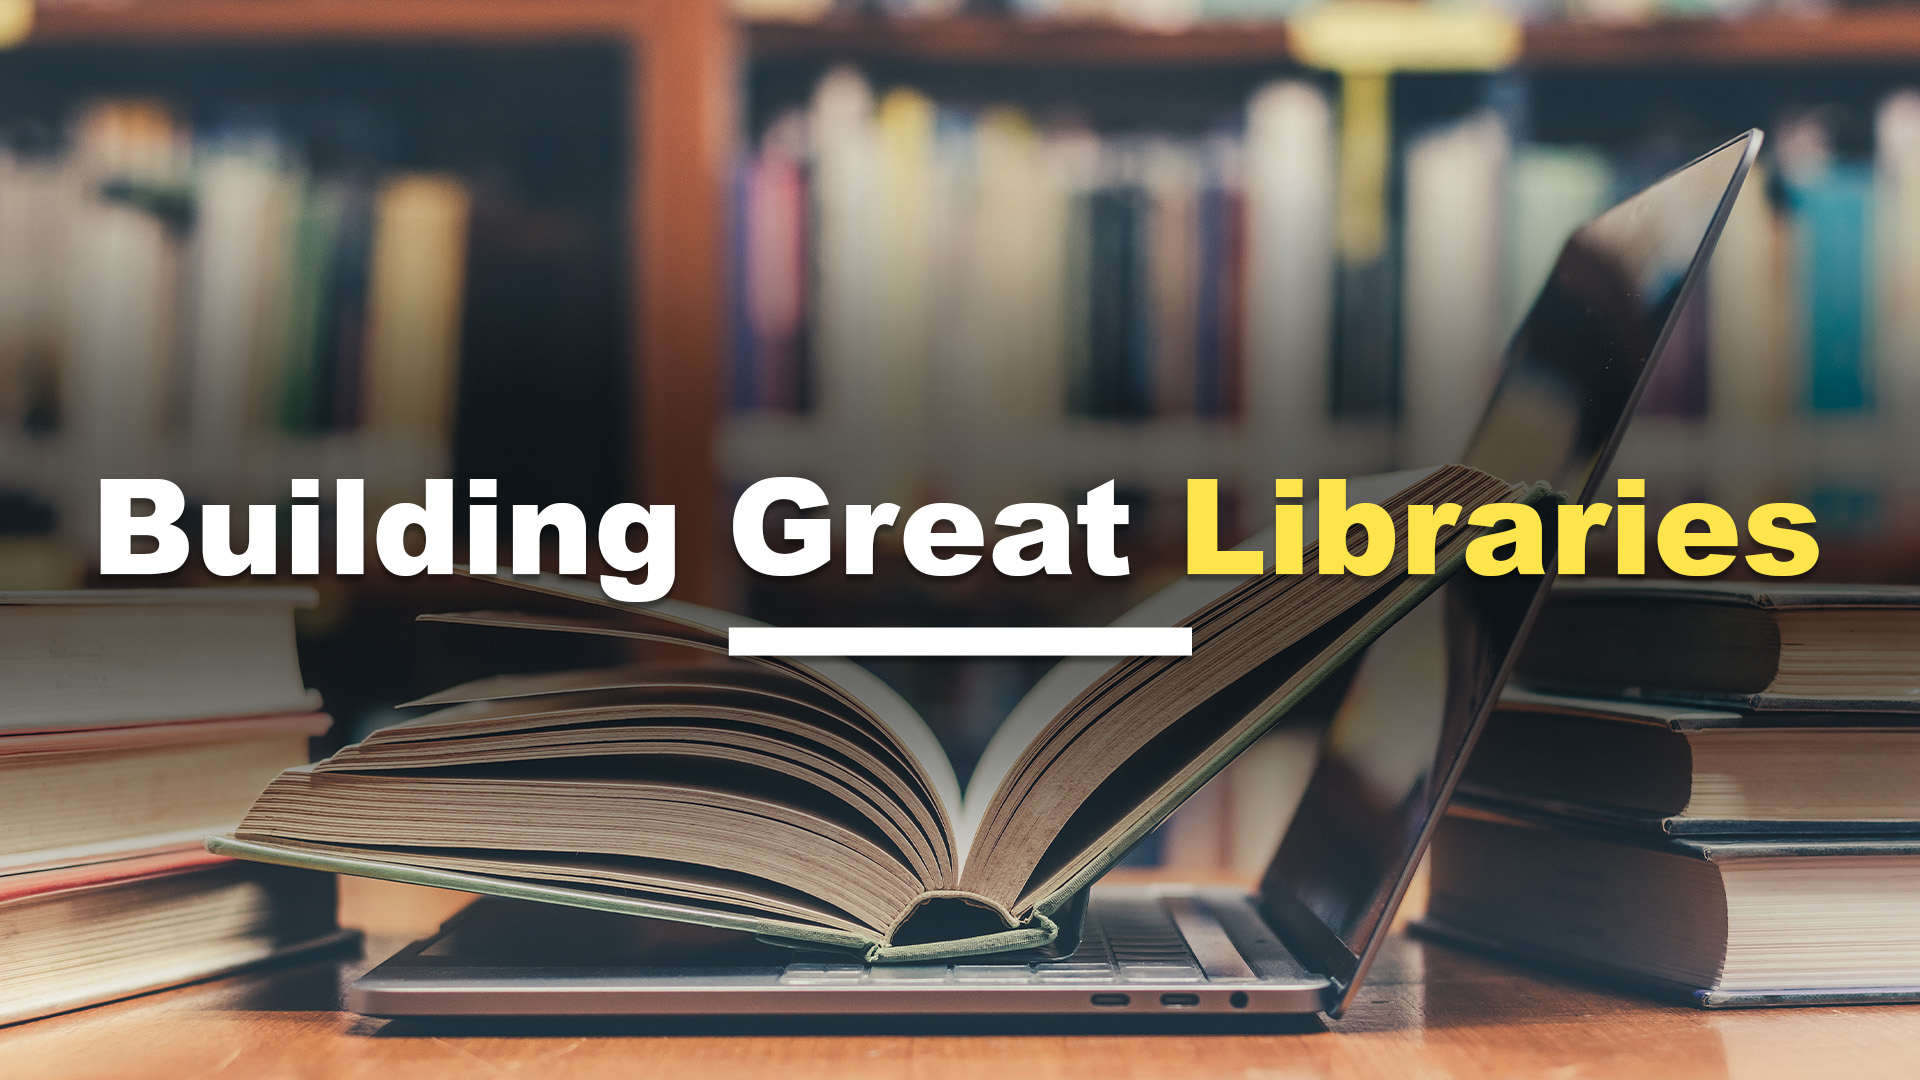 Building Great Libraries